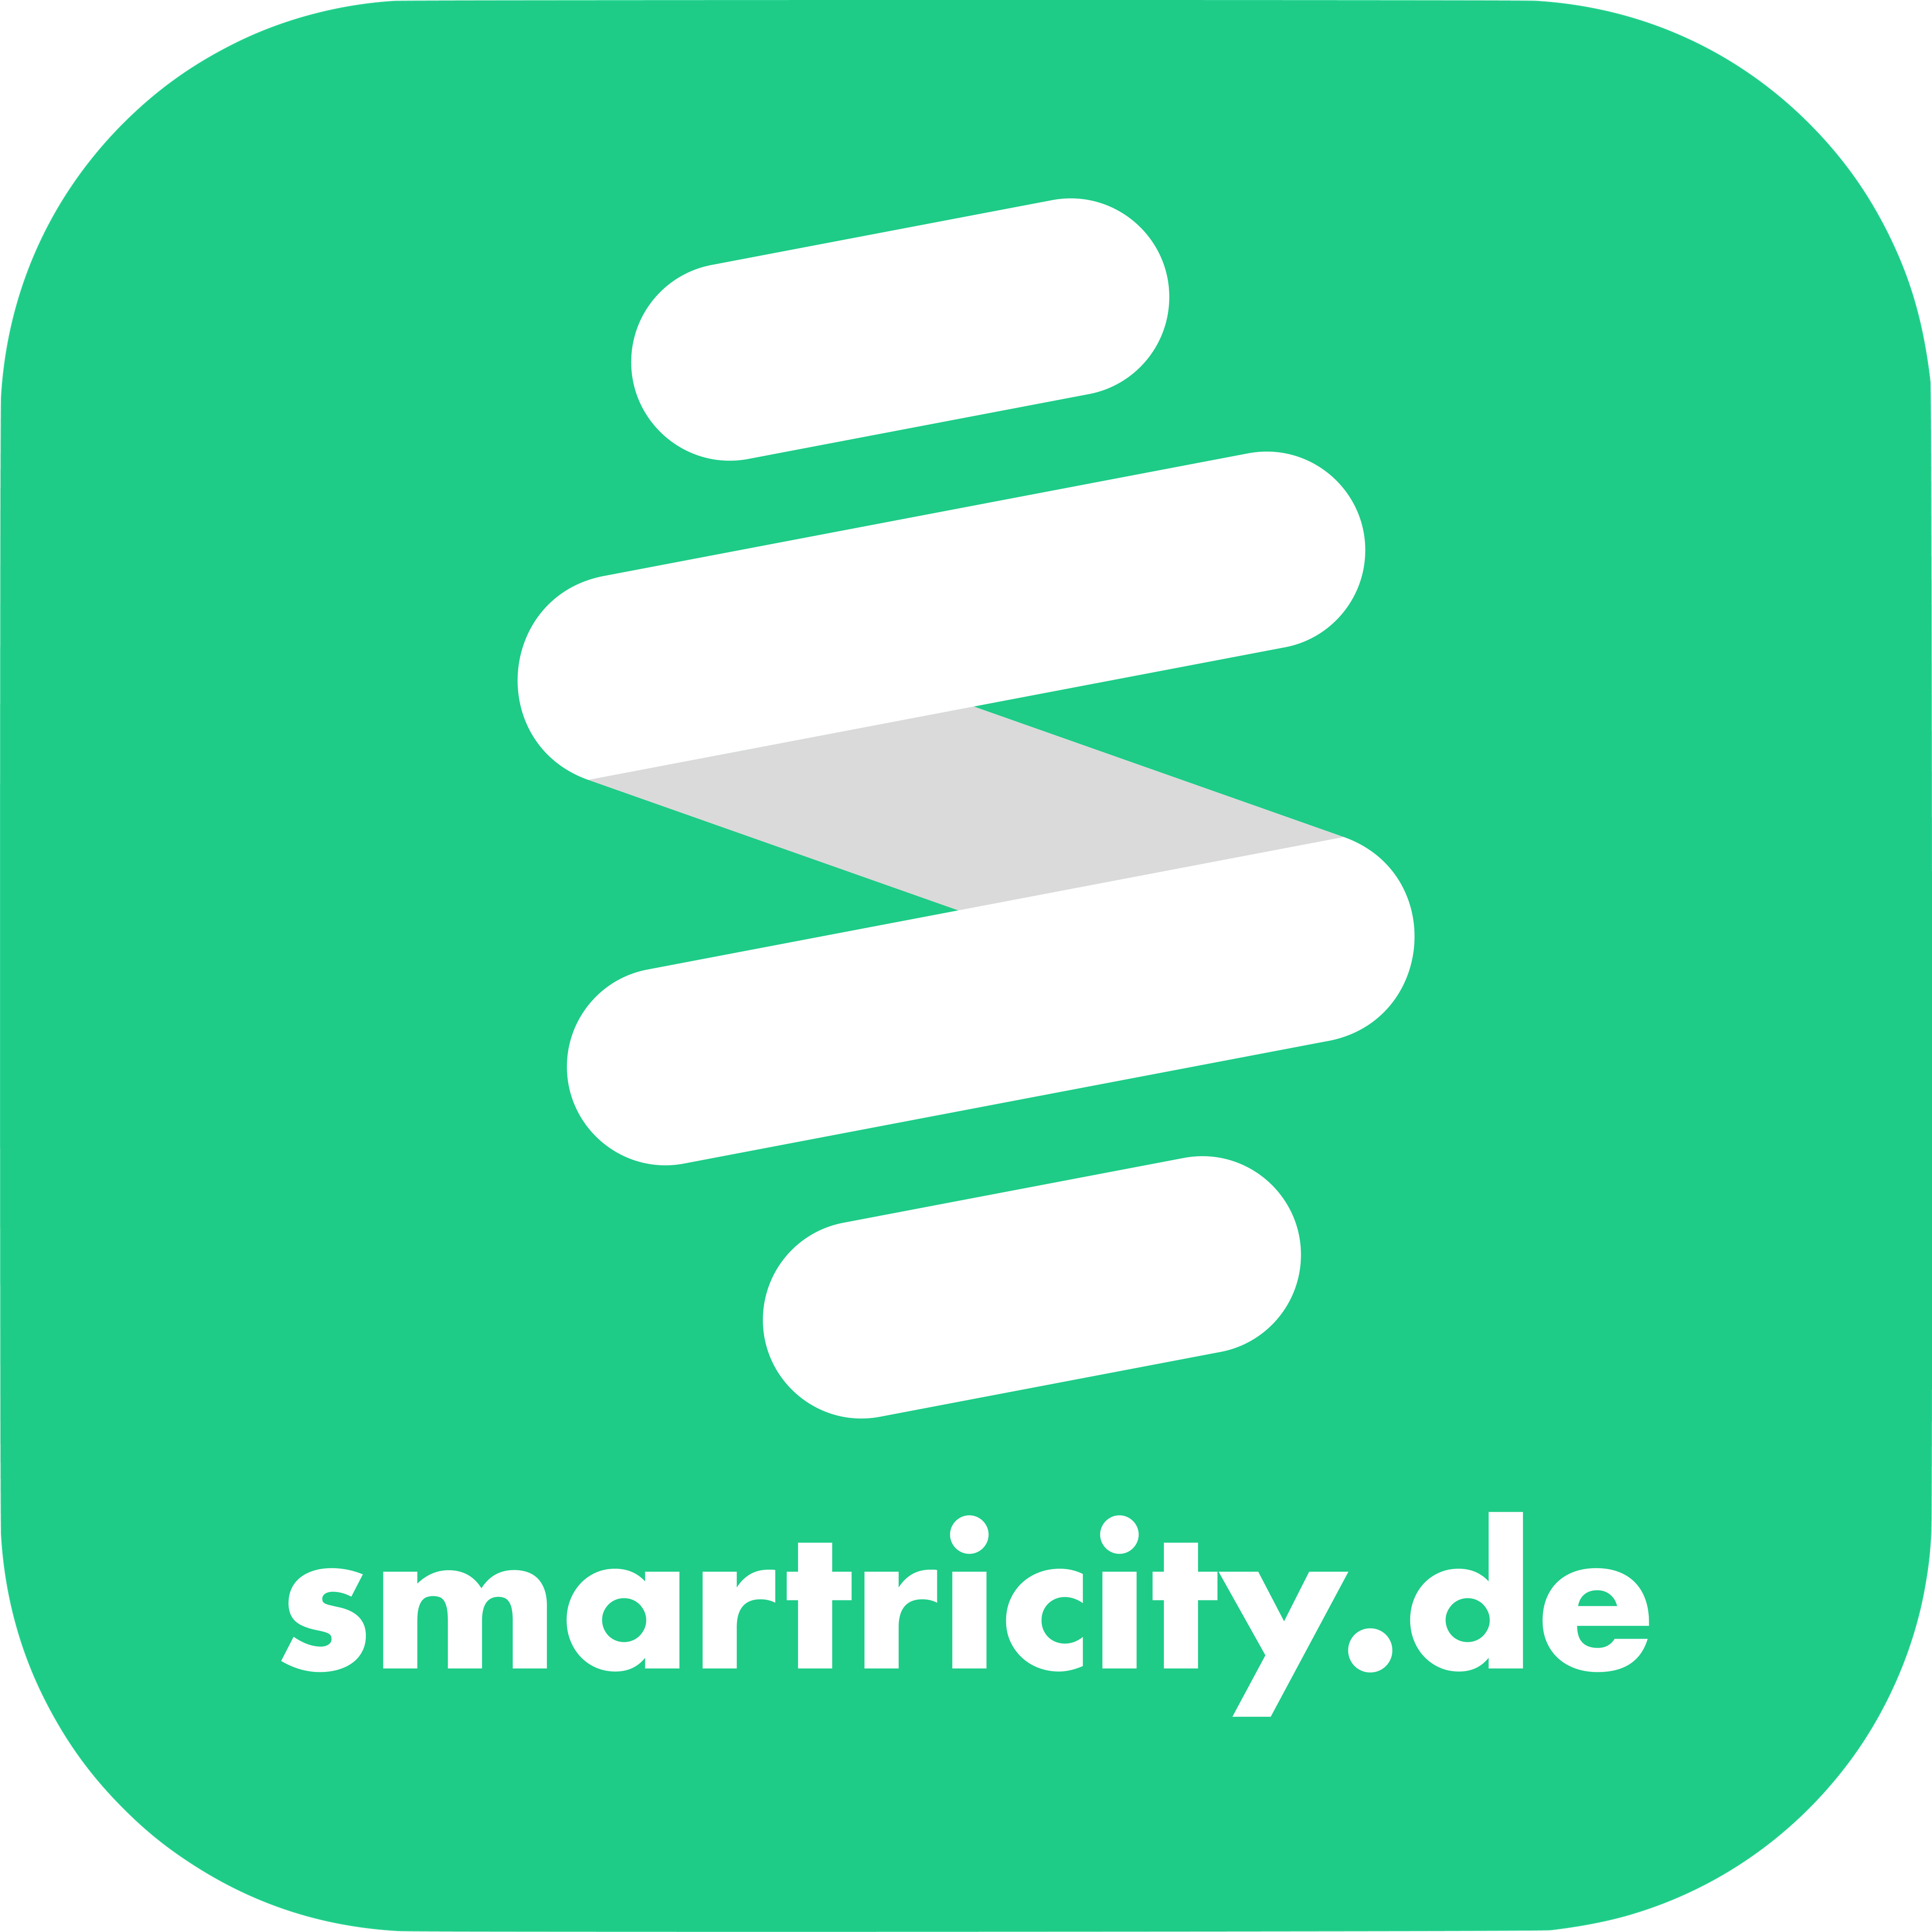 Smartricity